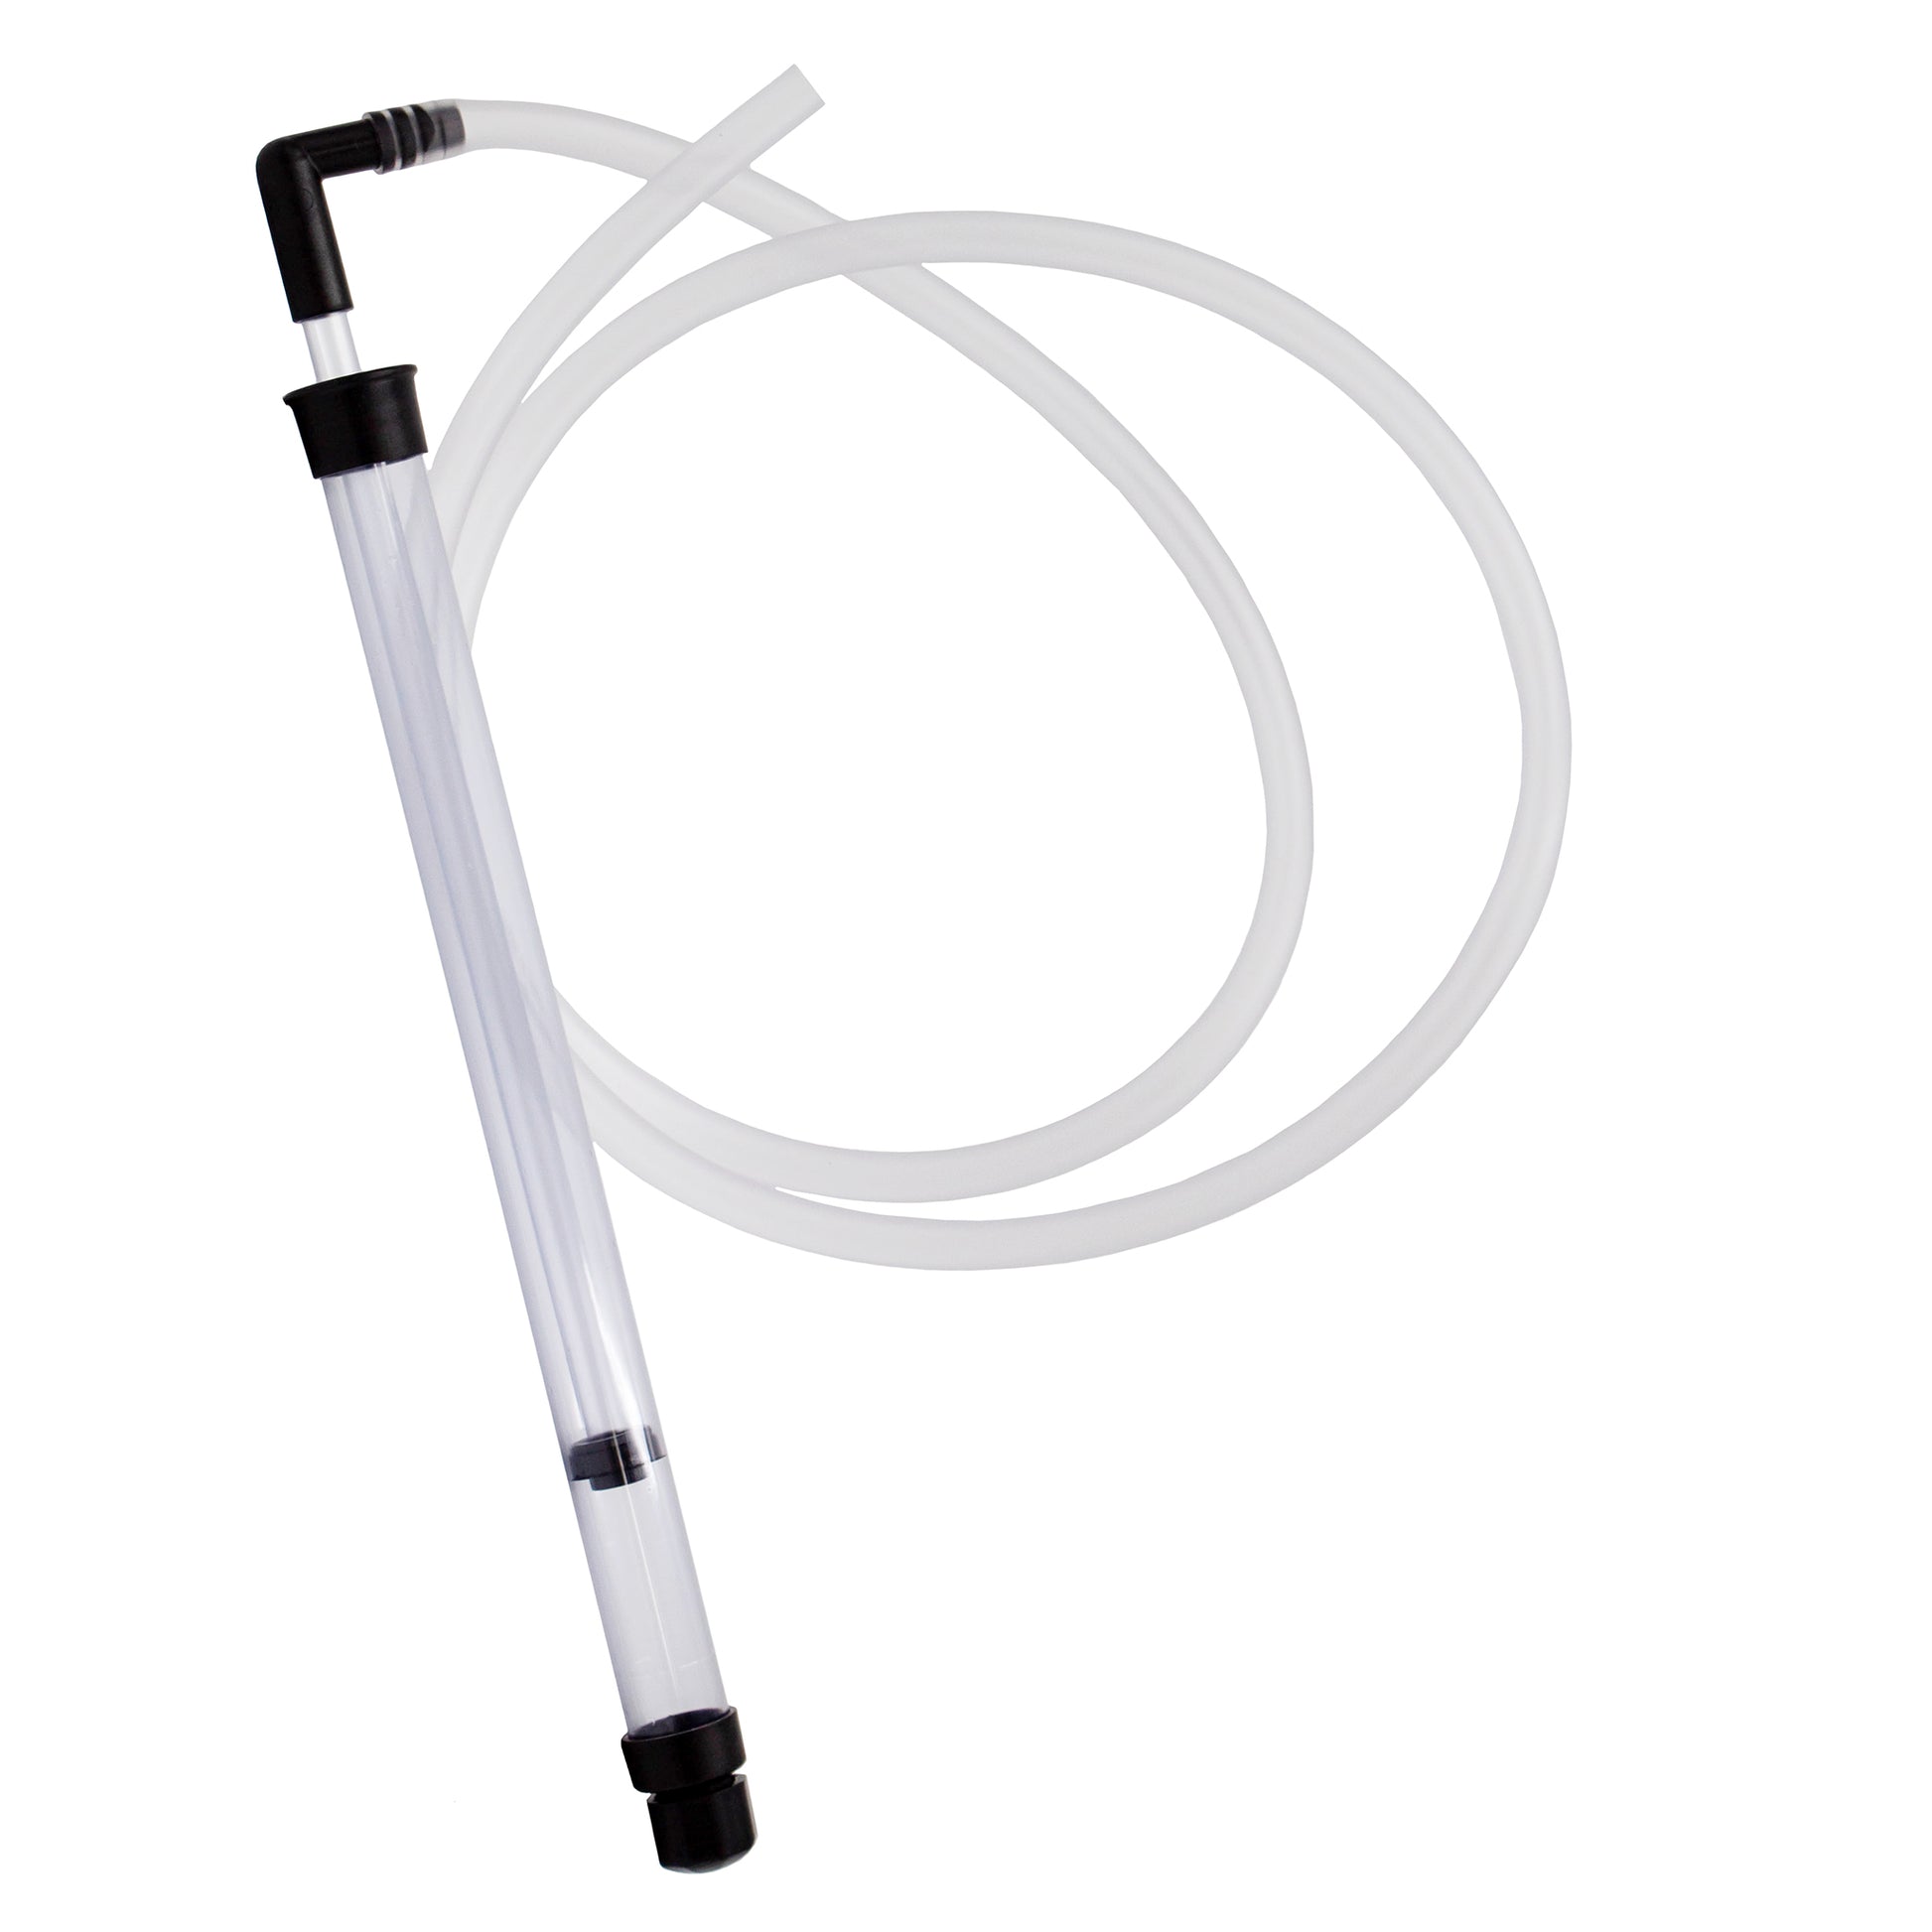 56cm long plastic syphon used in home brewing